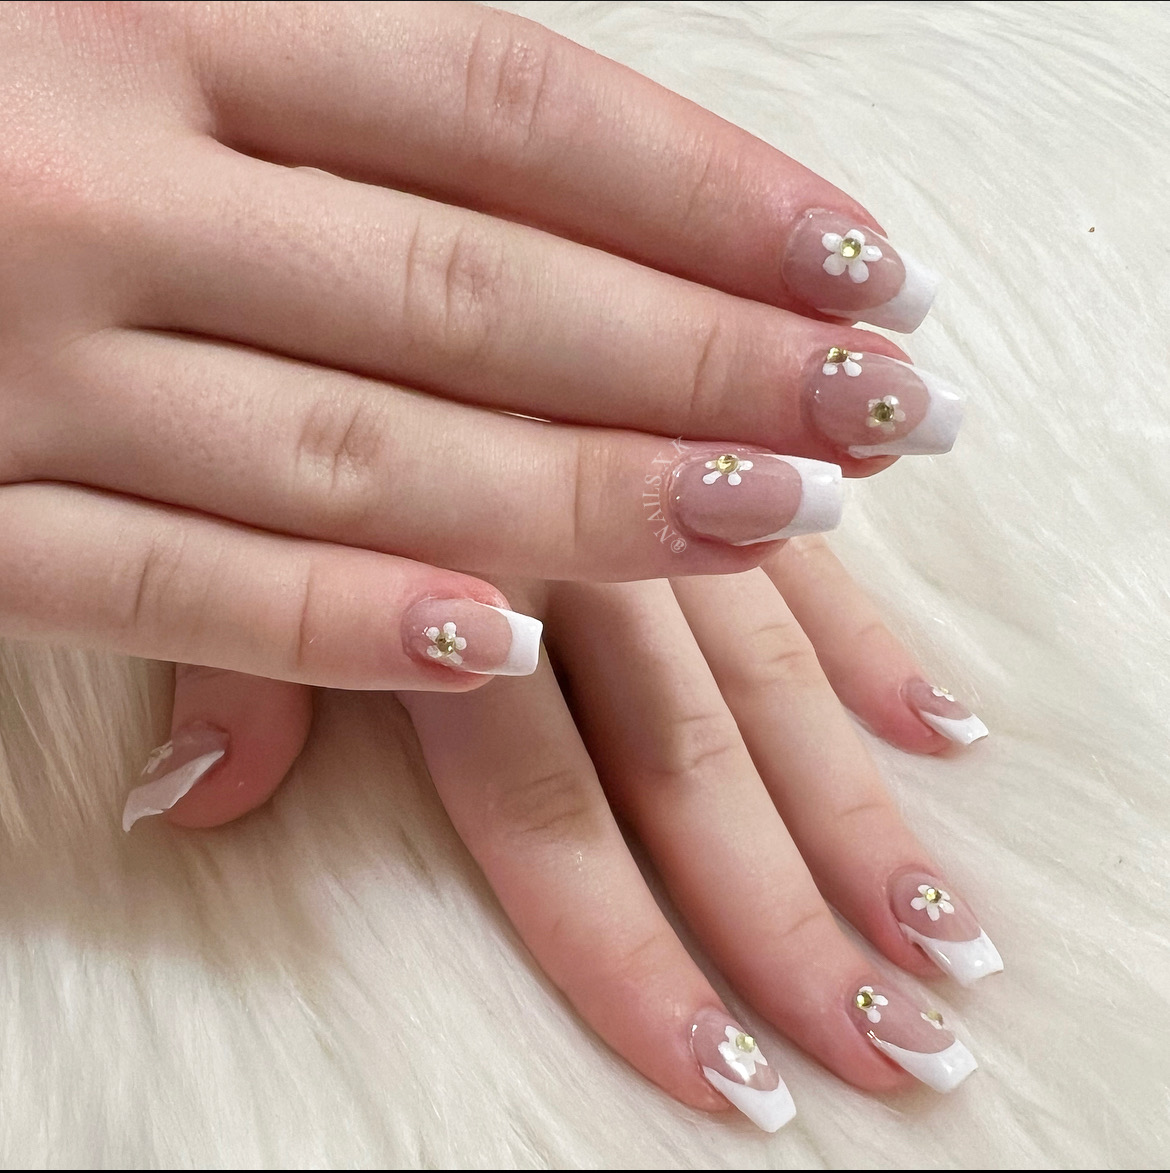 Hard gel set with french tips and floral accents. Nails by K